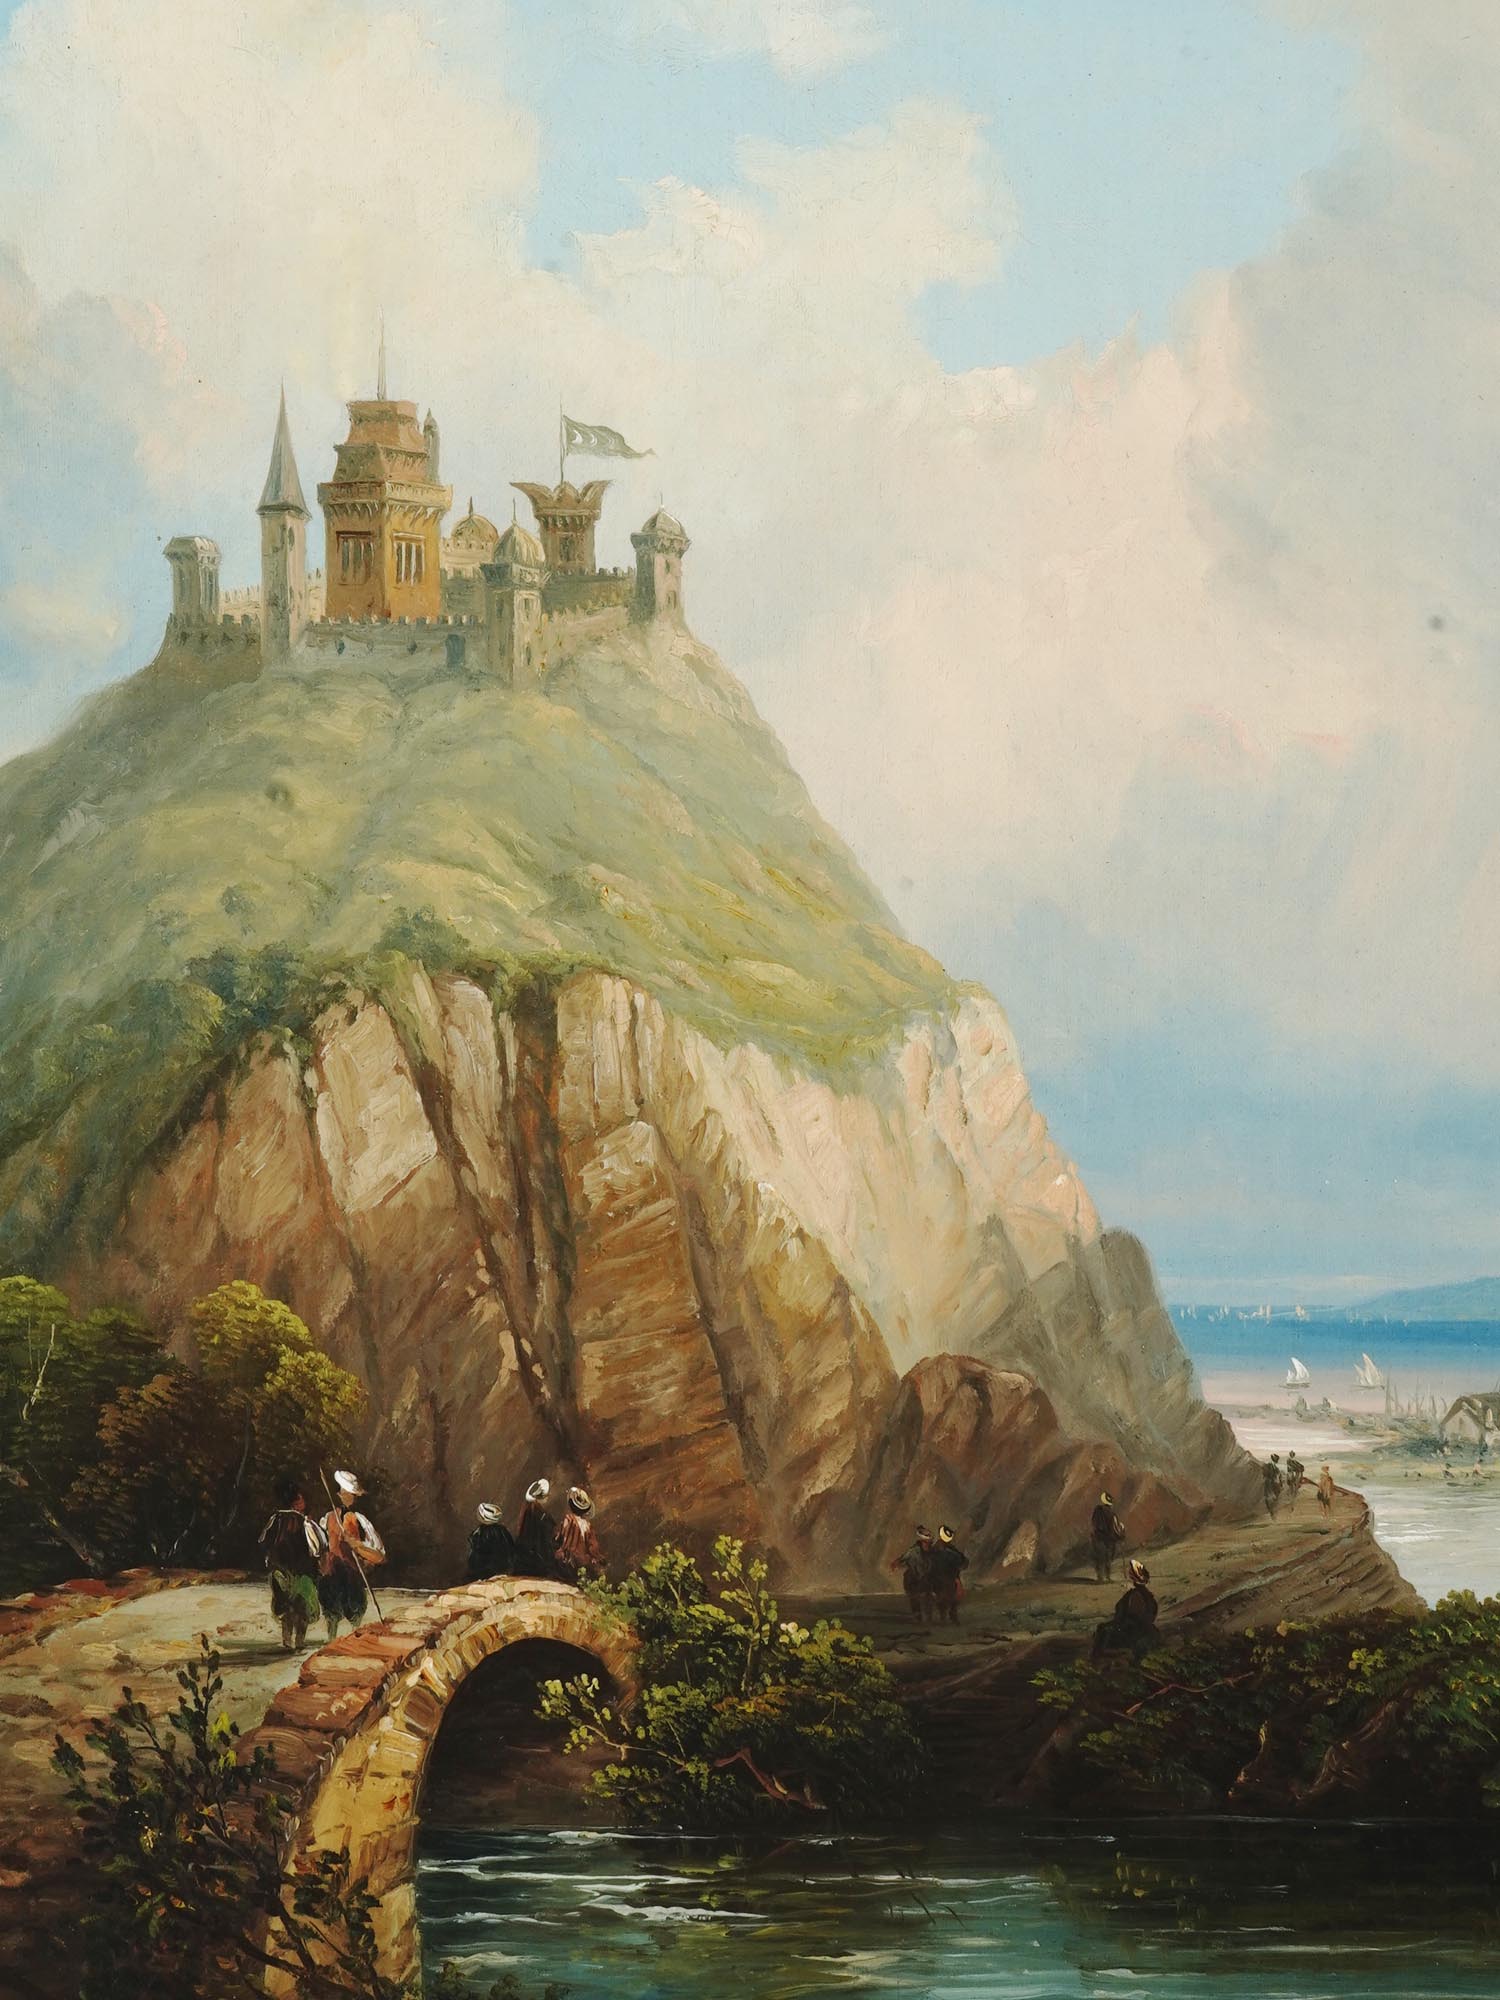 ENGLISH CASTLE LANDSCAPE OIL PAINTING BY HENRY SMYTH PIC-1